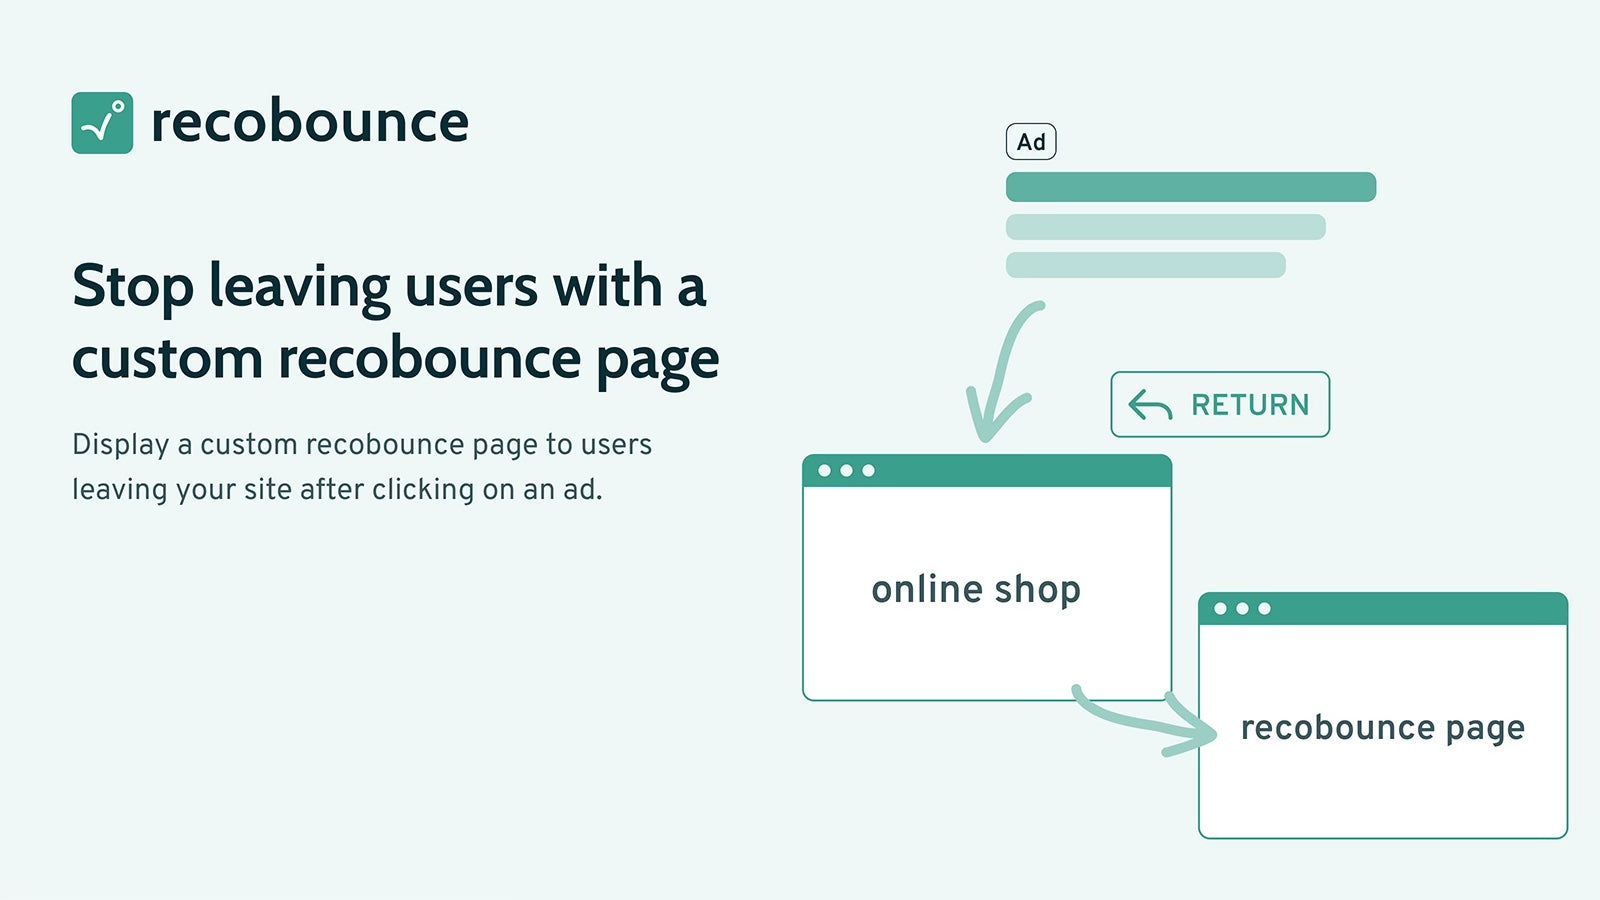 Stop leaving users with a custom recobounce page